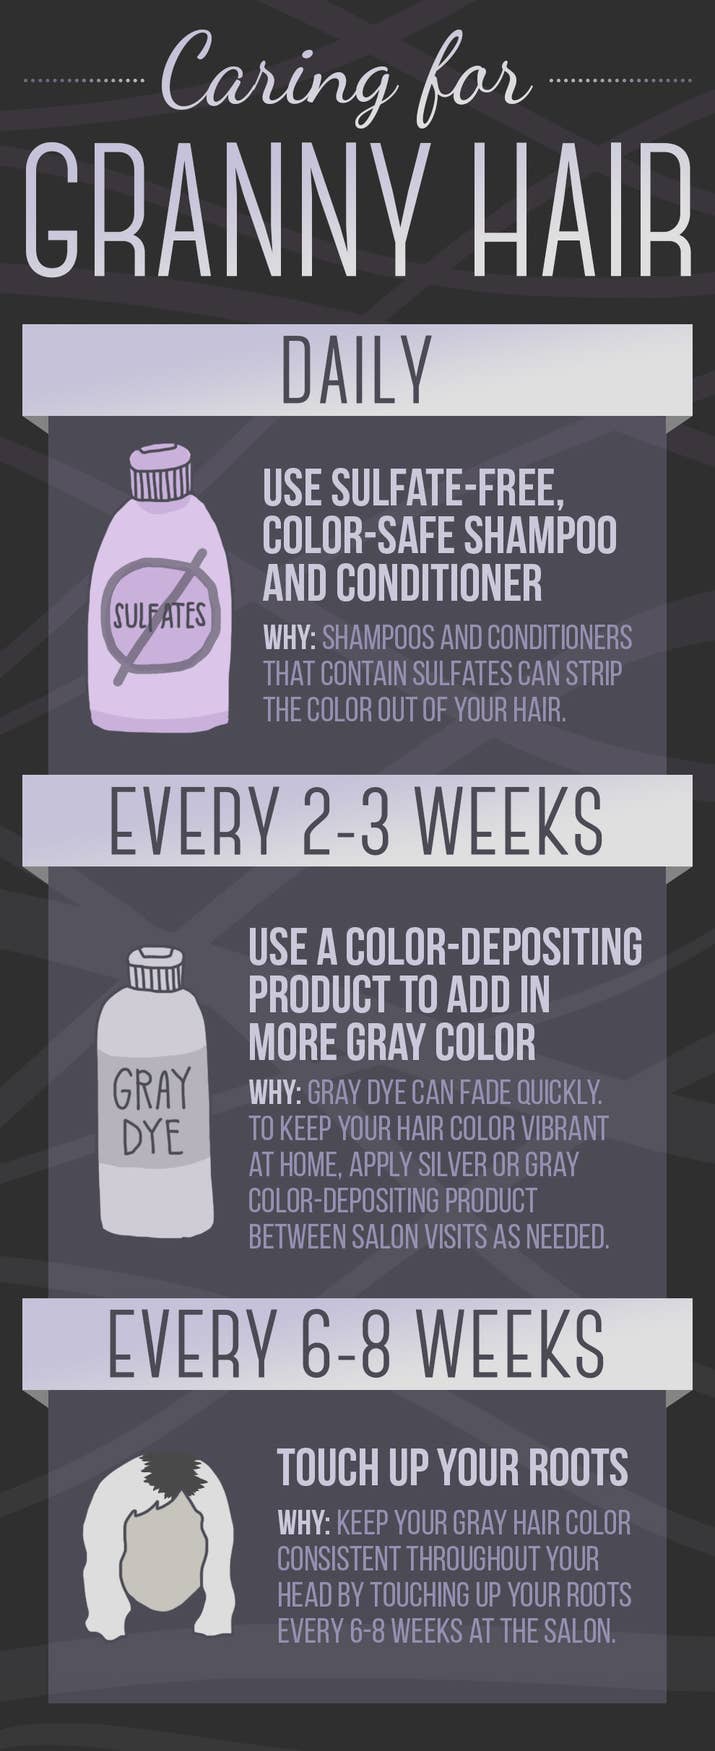 If you like the look of gray hair with dark roots, you can stretch the time between salon appointments to opt for an ombre gray hair color instead.